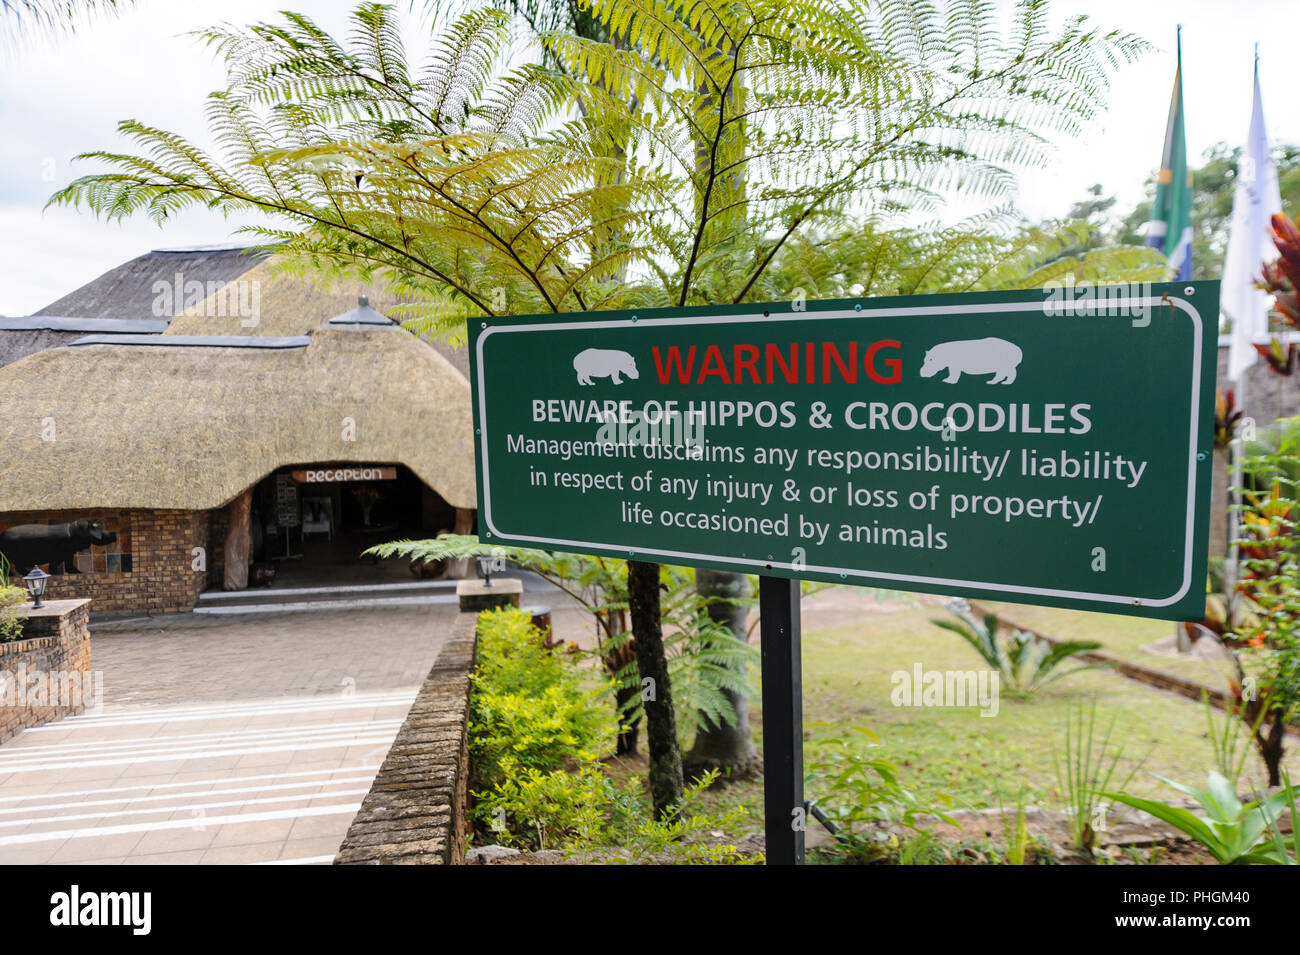 Warning sign board at the entrance of an hotel in South Africa showing the possibility to encounter dangerous animals like Hippos and Crocodiles Stock Photo